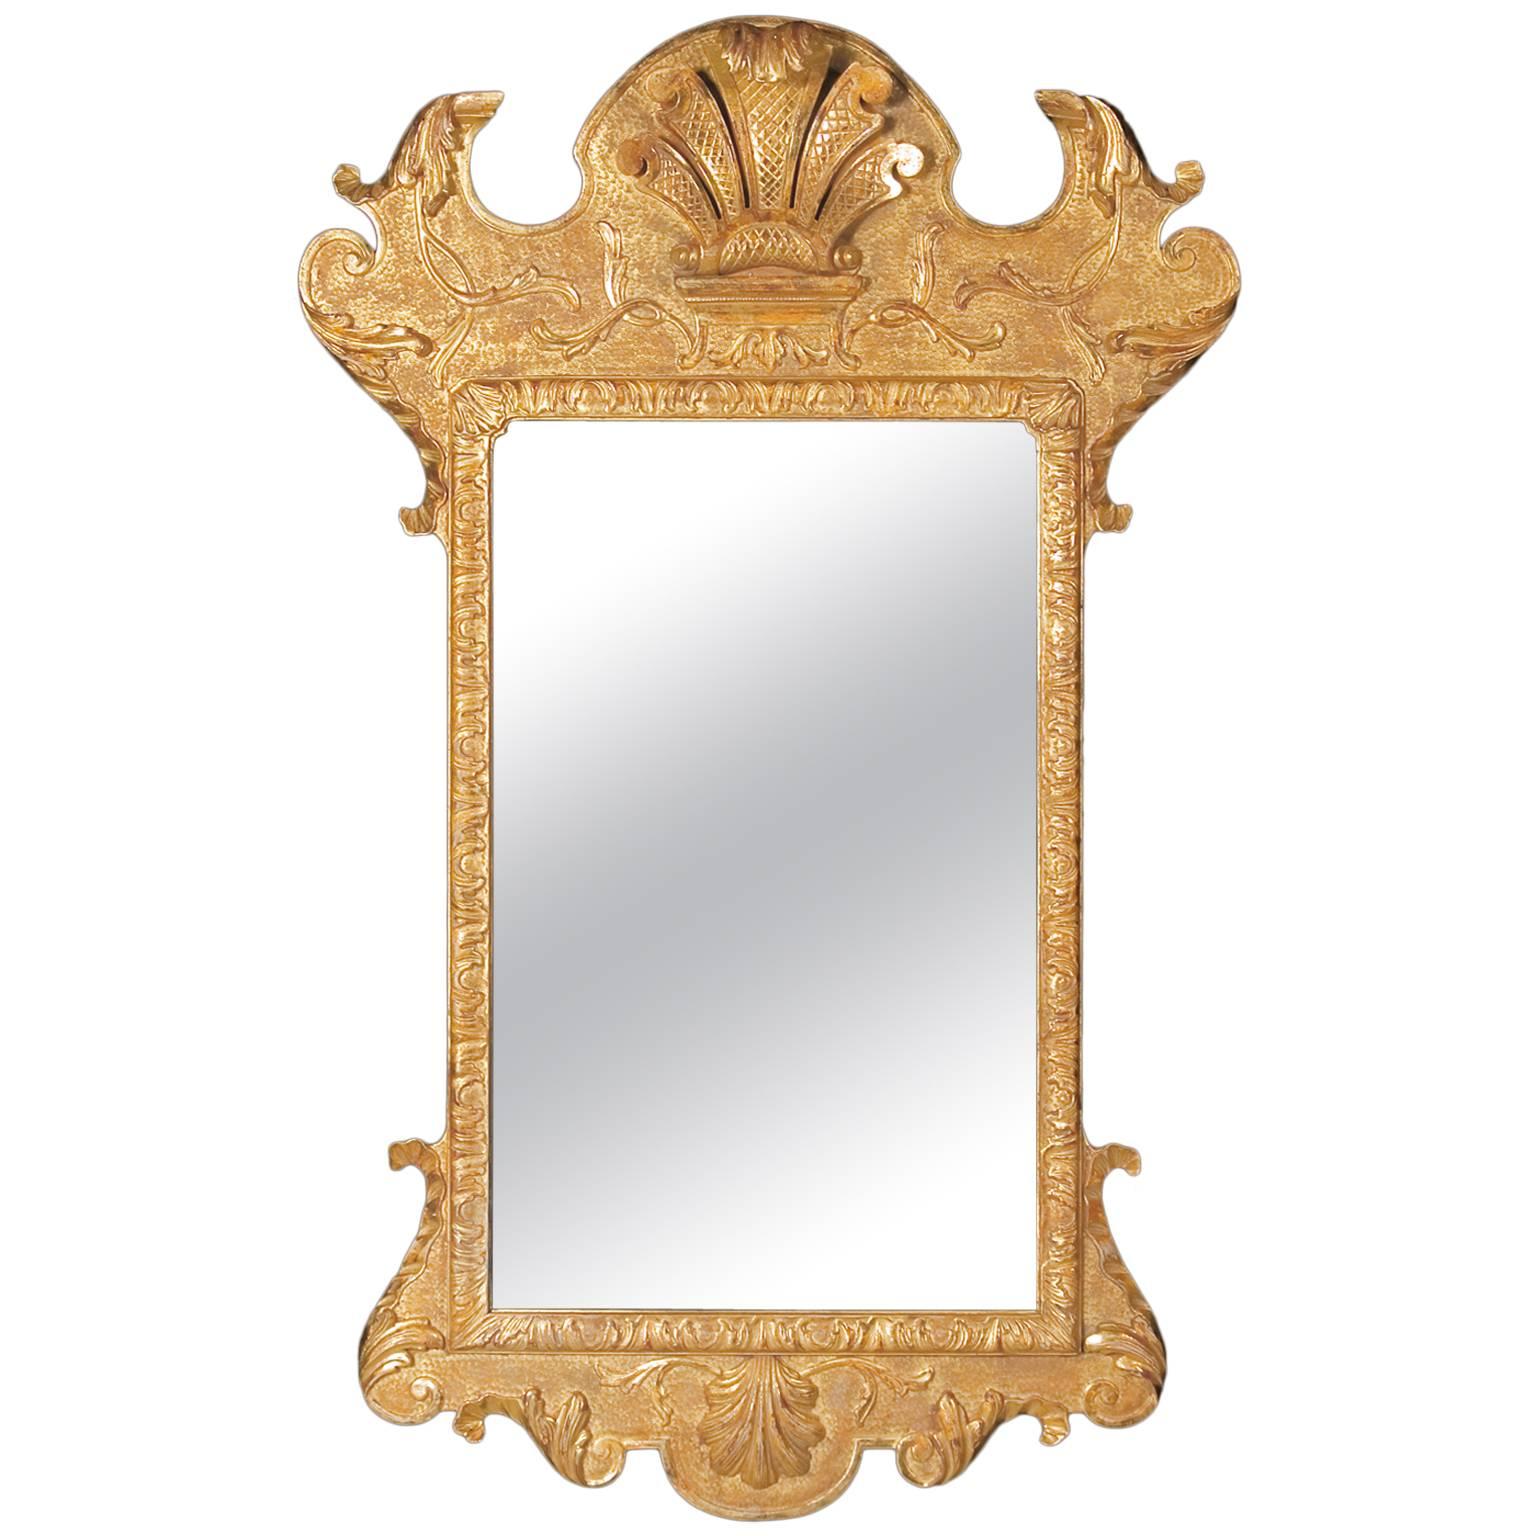 Gilt Gesso Pier Mirror in the manner of George I